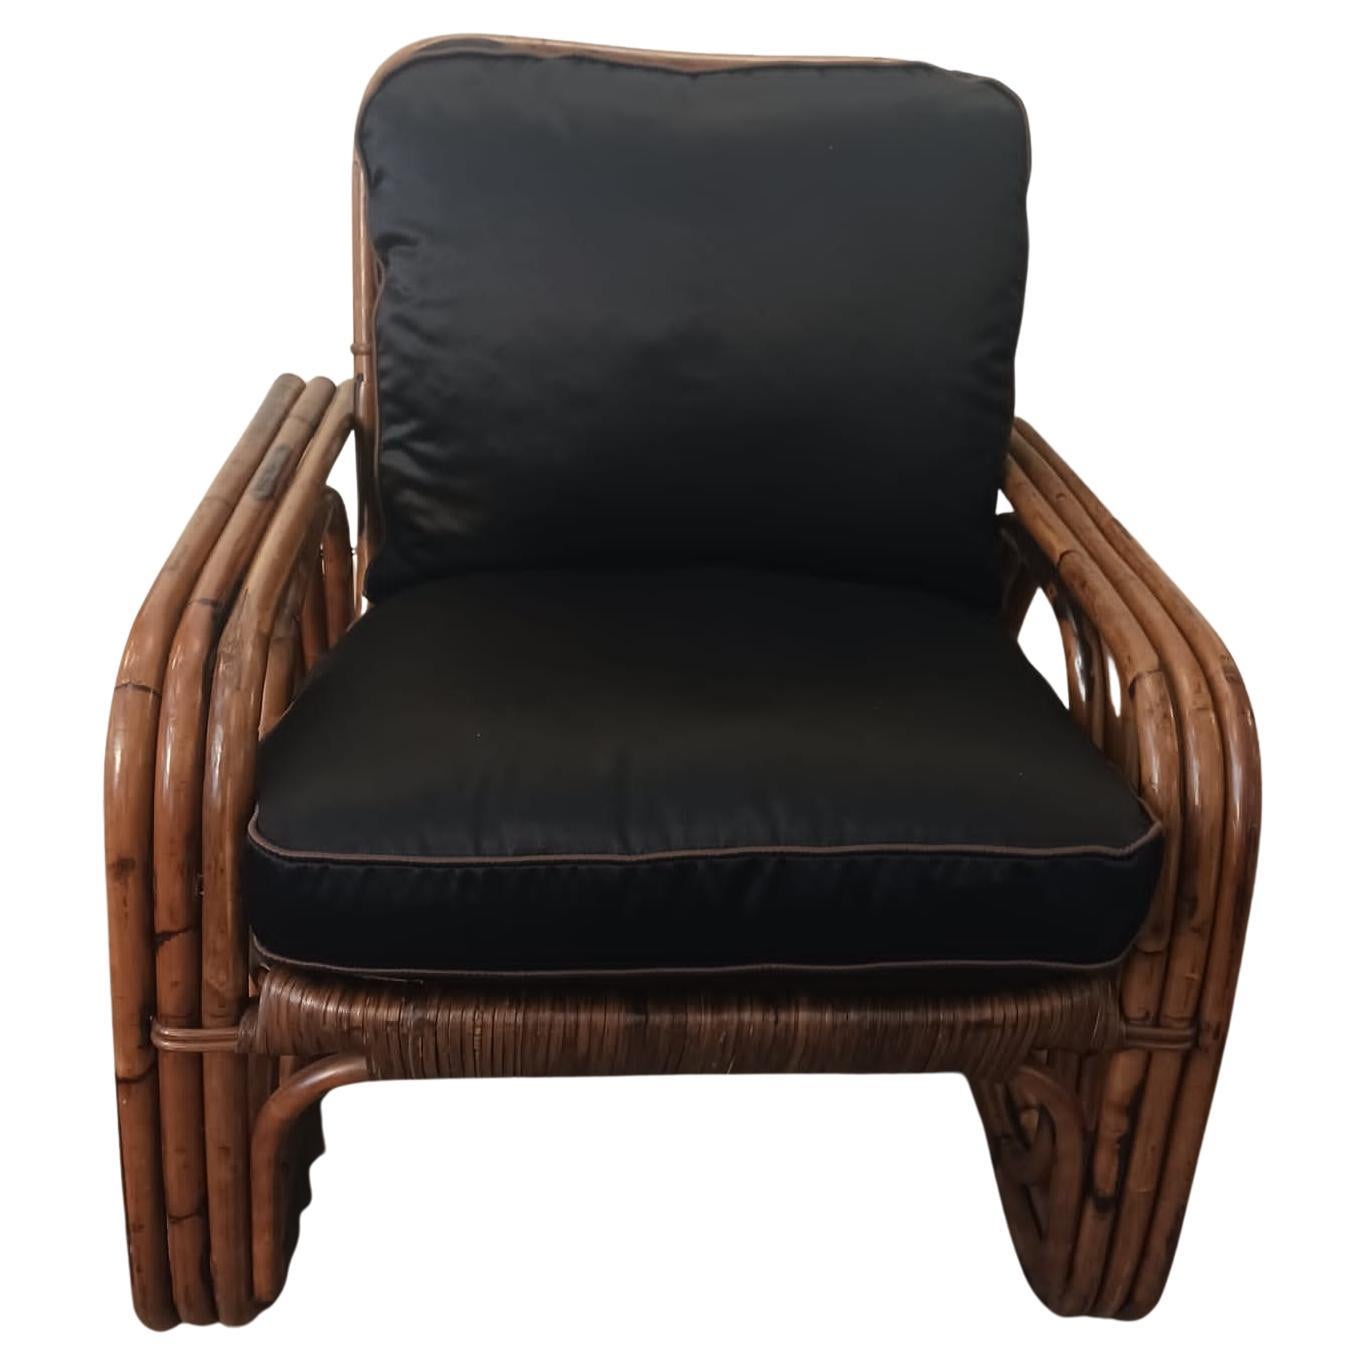 Bamboo armchairs from the 1950s from Italy by Bonacina.
New feather pillows and cotton covers. Black color and bronze edges. Conservative restoration. The price refers to the pair. Dimensions: cm 70x77 xh 80.